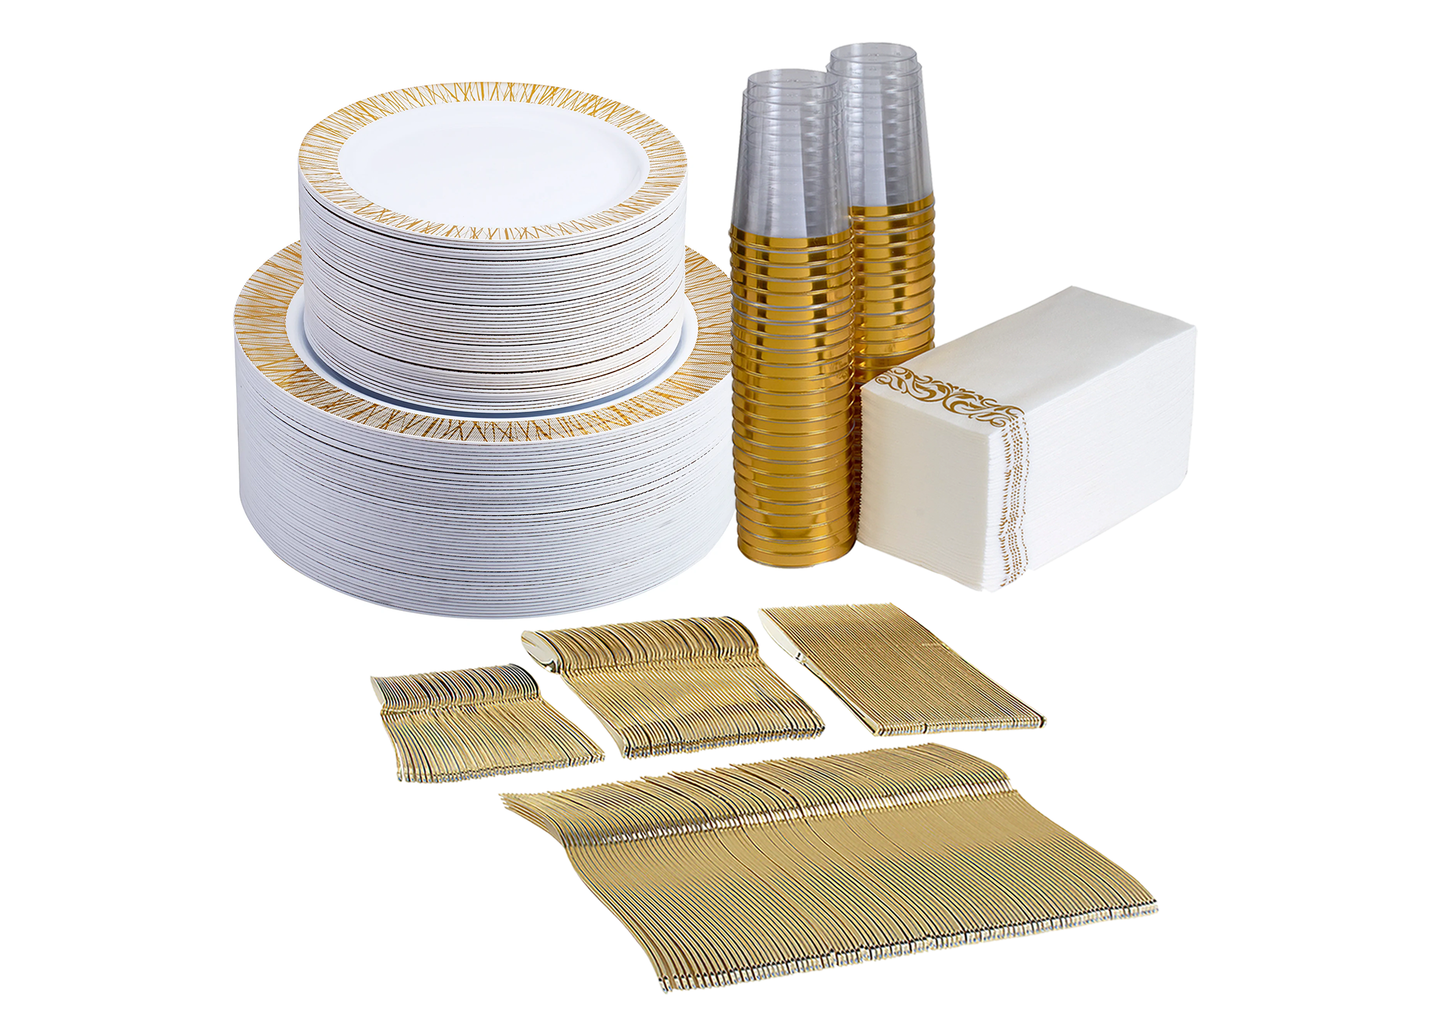 450 -Piece gold dinnerware set for 50 guests Includes: 100 gold design plastic plates, 250 gold plastic silverware utensils, 50 napkins & 50 cups